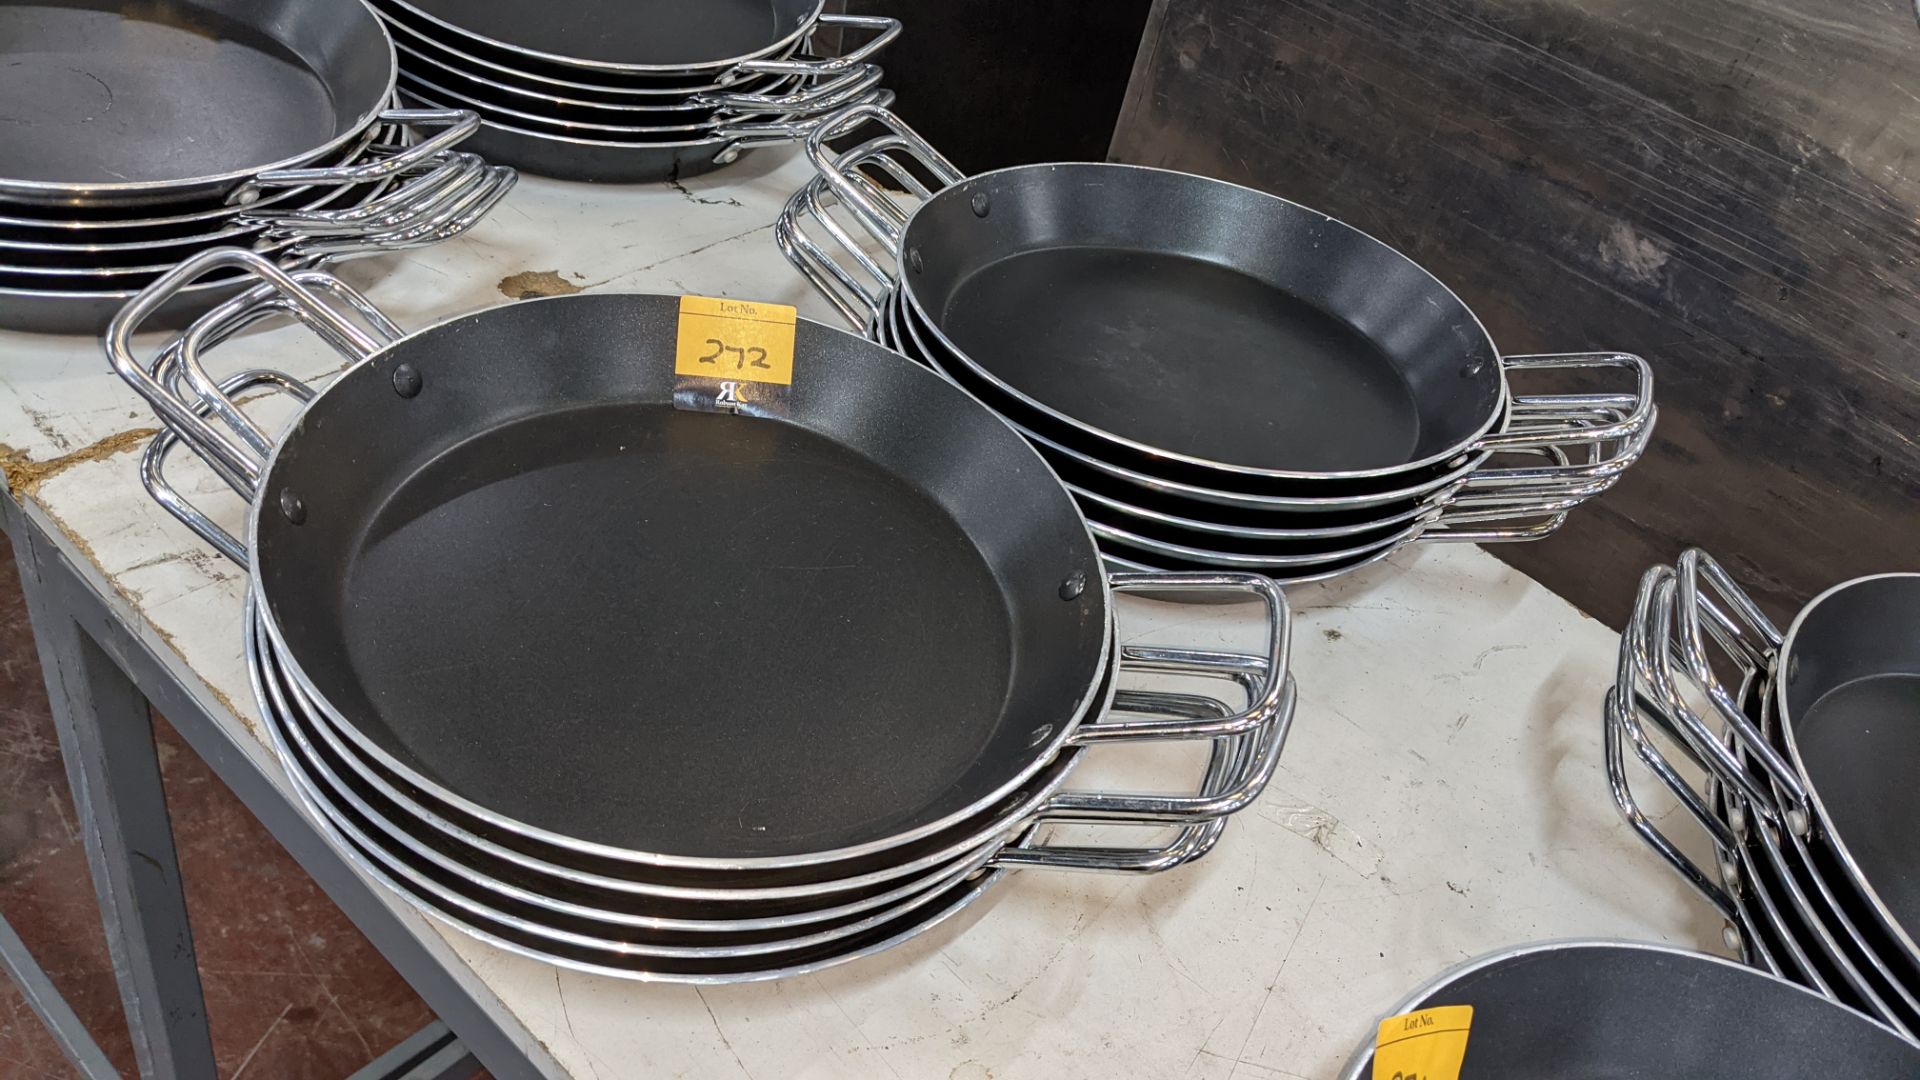 10 off 30cm aluminium non-stick paella pans with twin handles NB. Diameter references the size exclu - Image 3 of 4